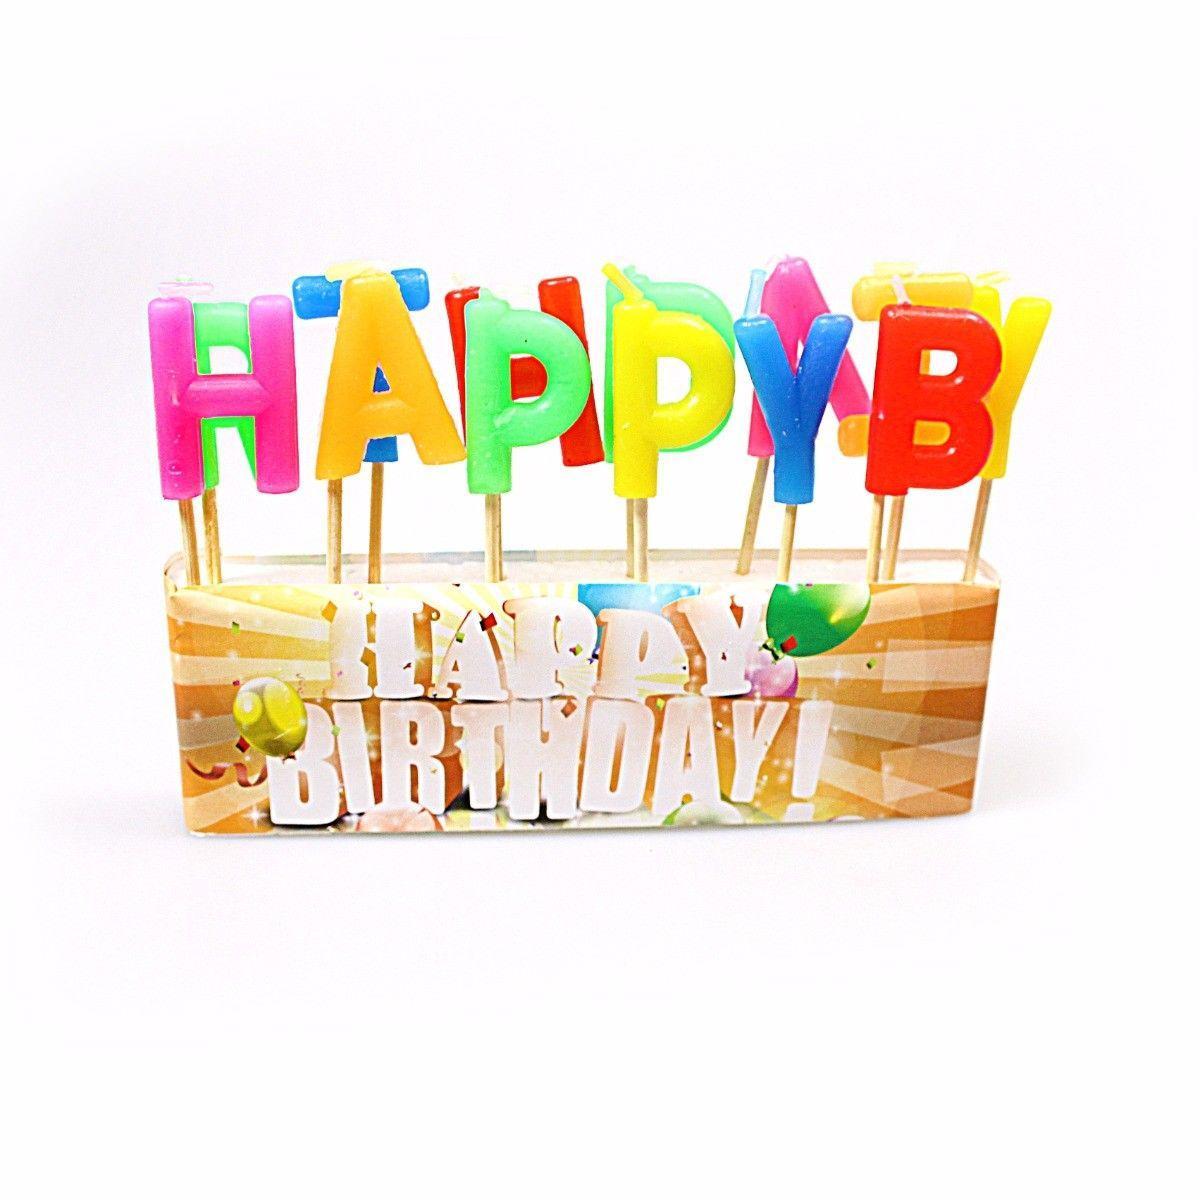 Happy Birthday Candle Letters Assorted Colours Pack of 13 0235 (Large Letter Rate)